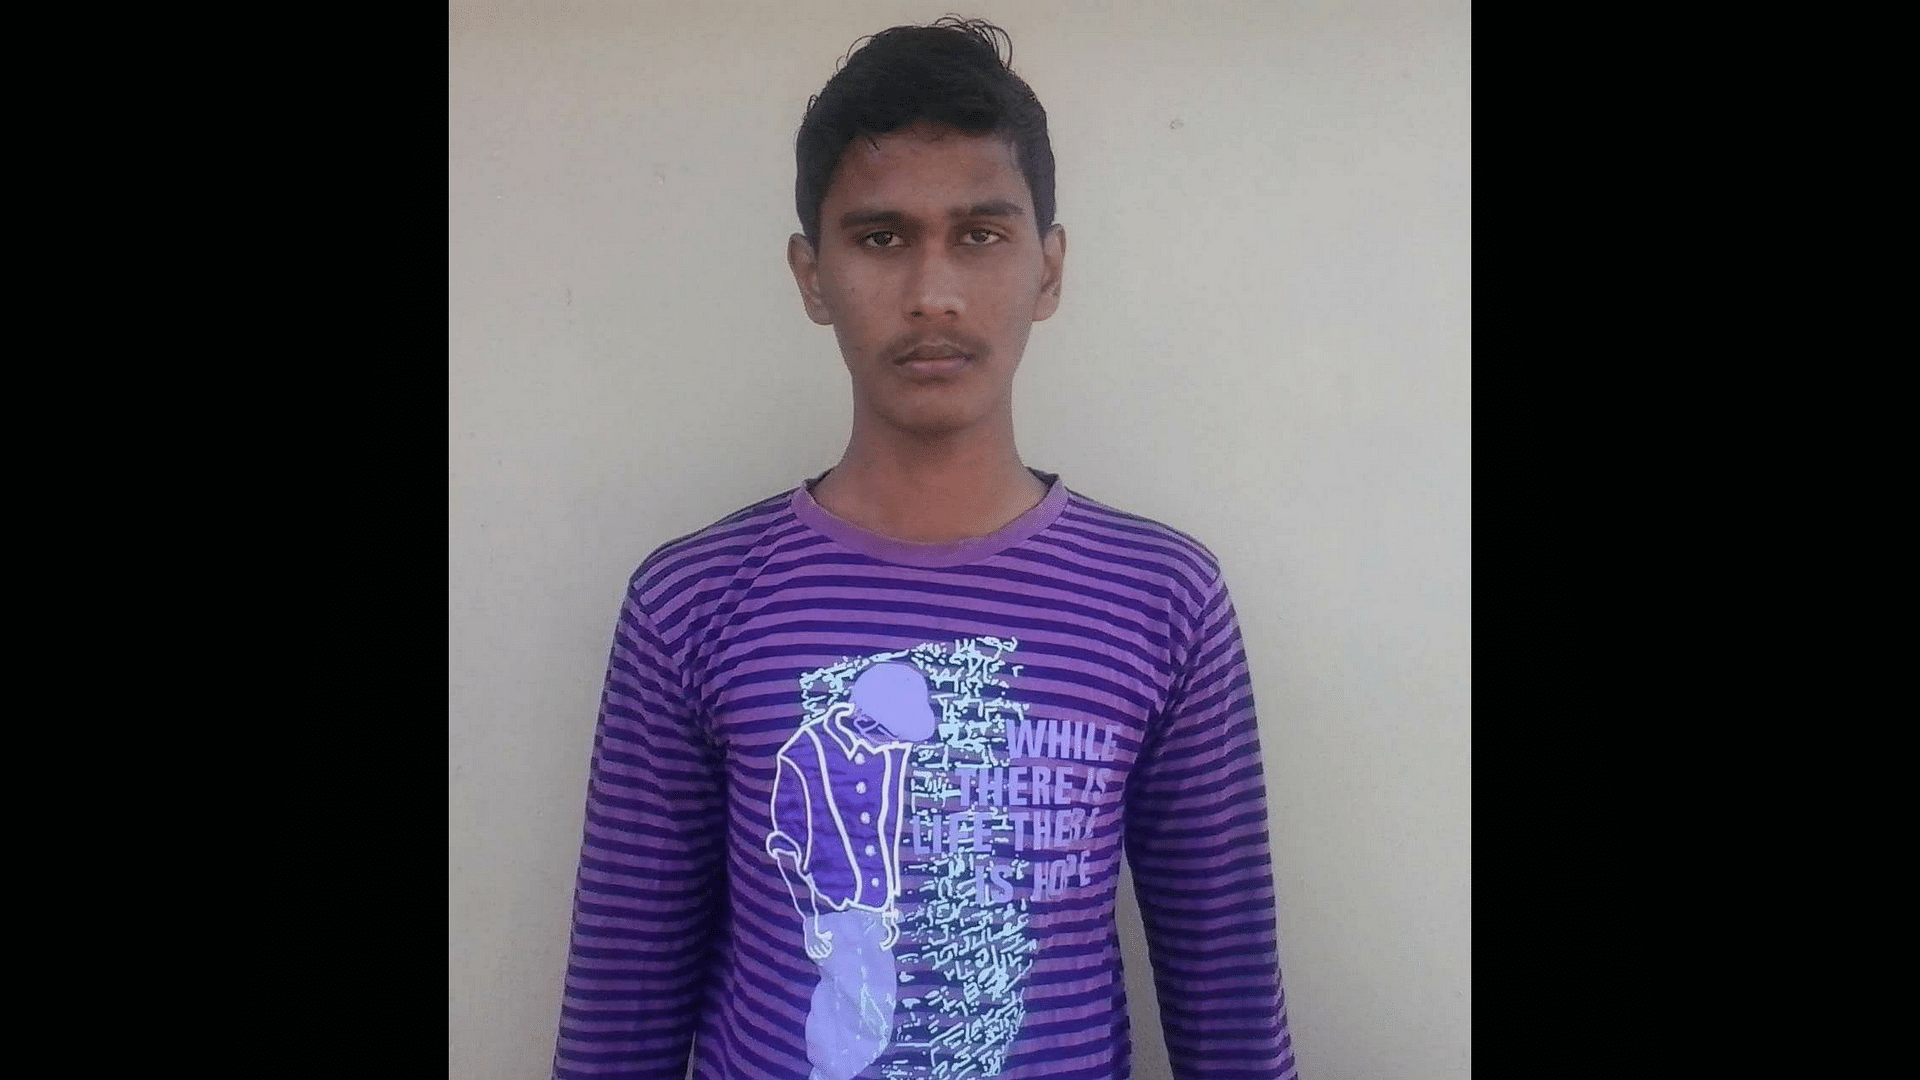 Aakash, the stalker who was arrested by the police